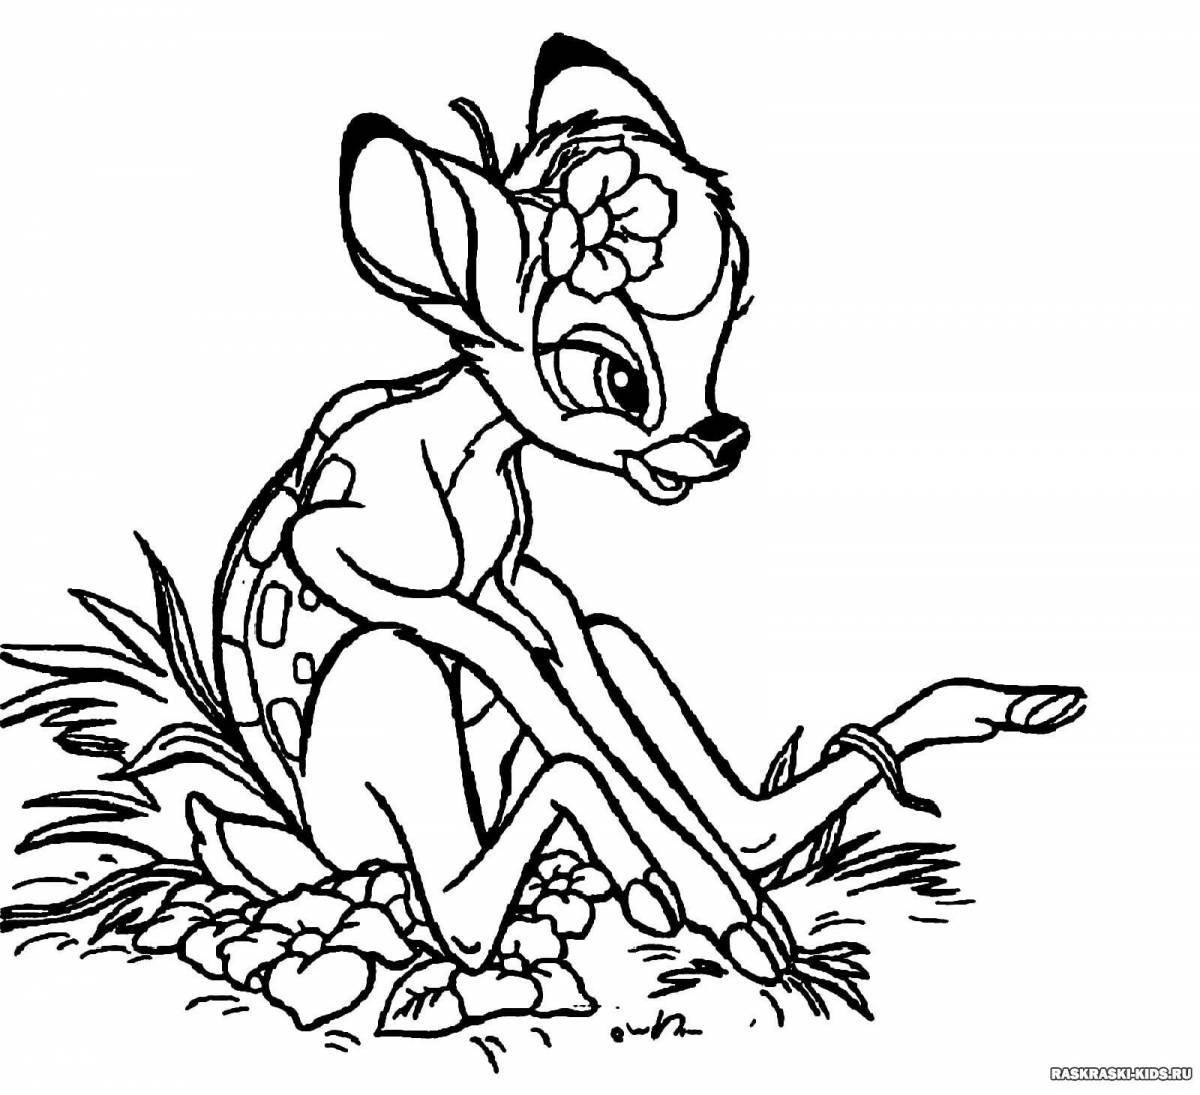 Exciting bambi coloring book for 3-4 year olds